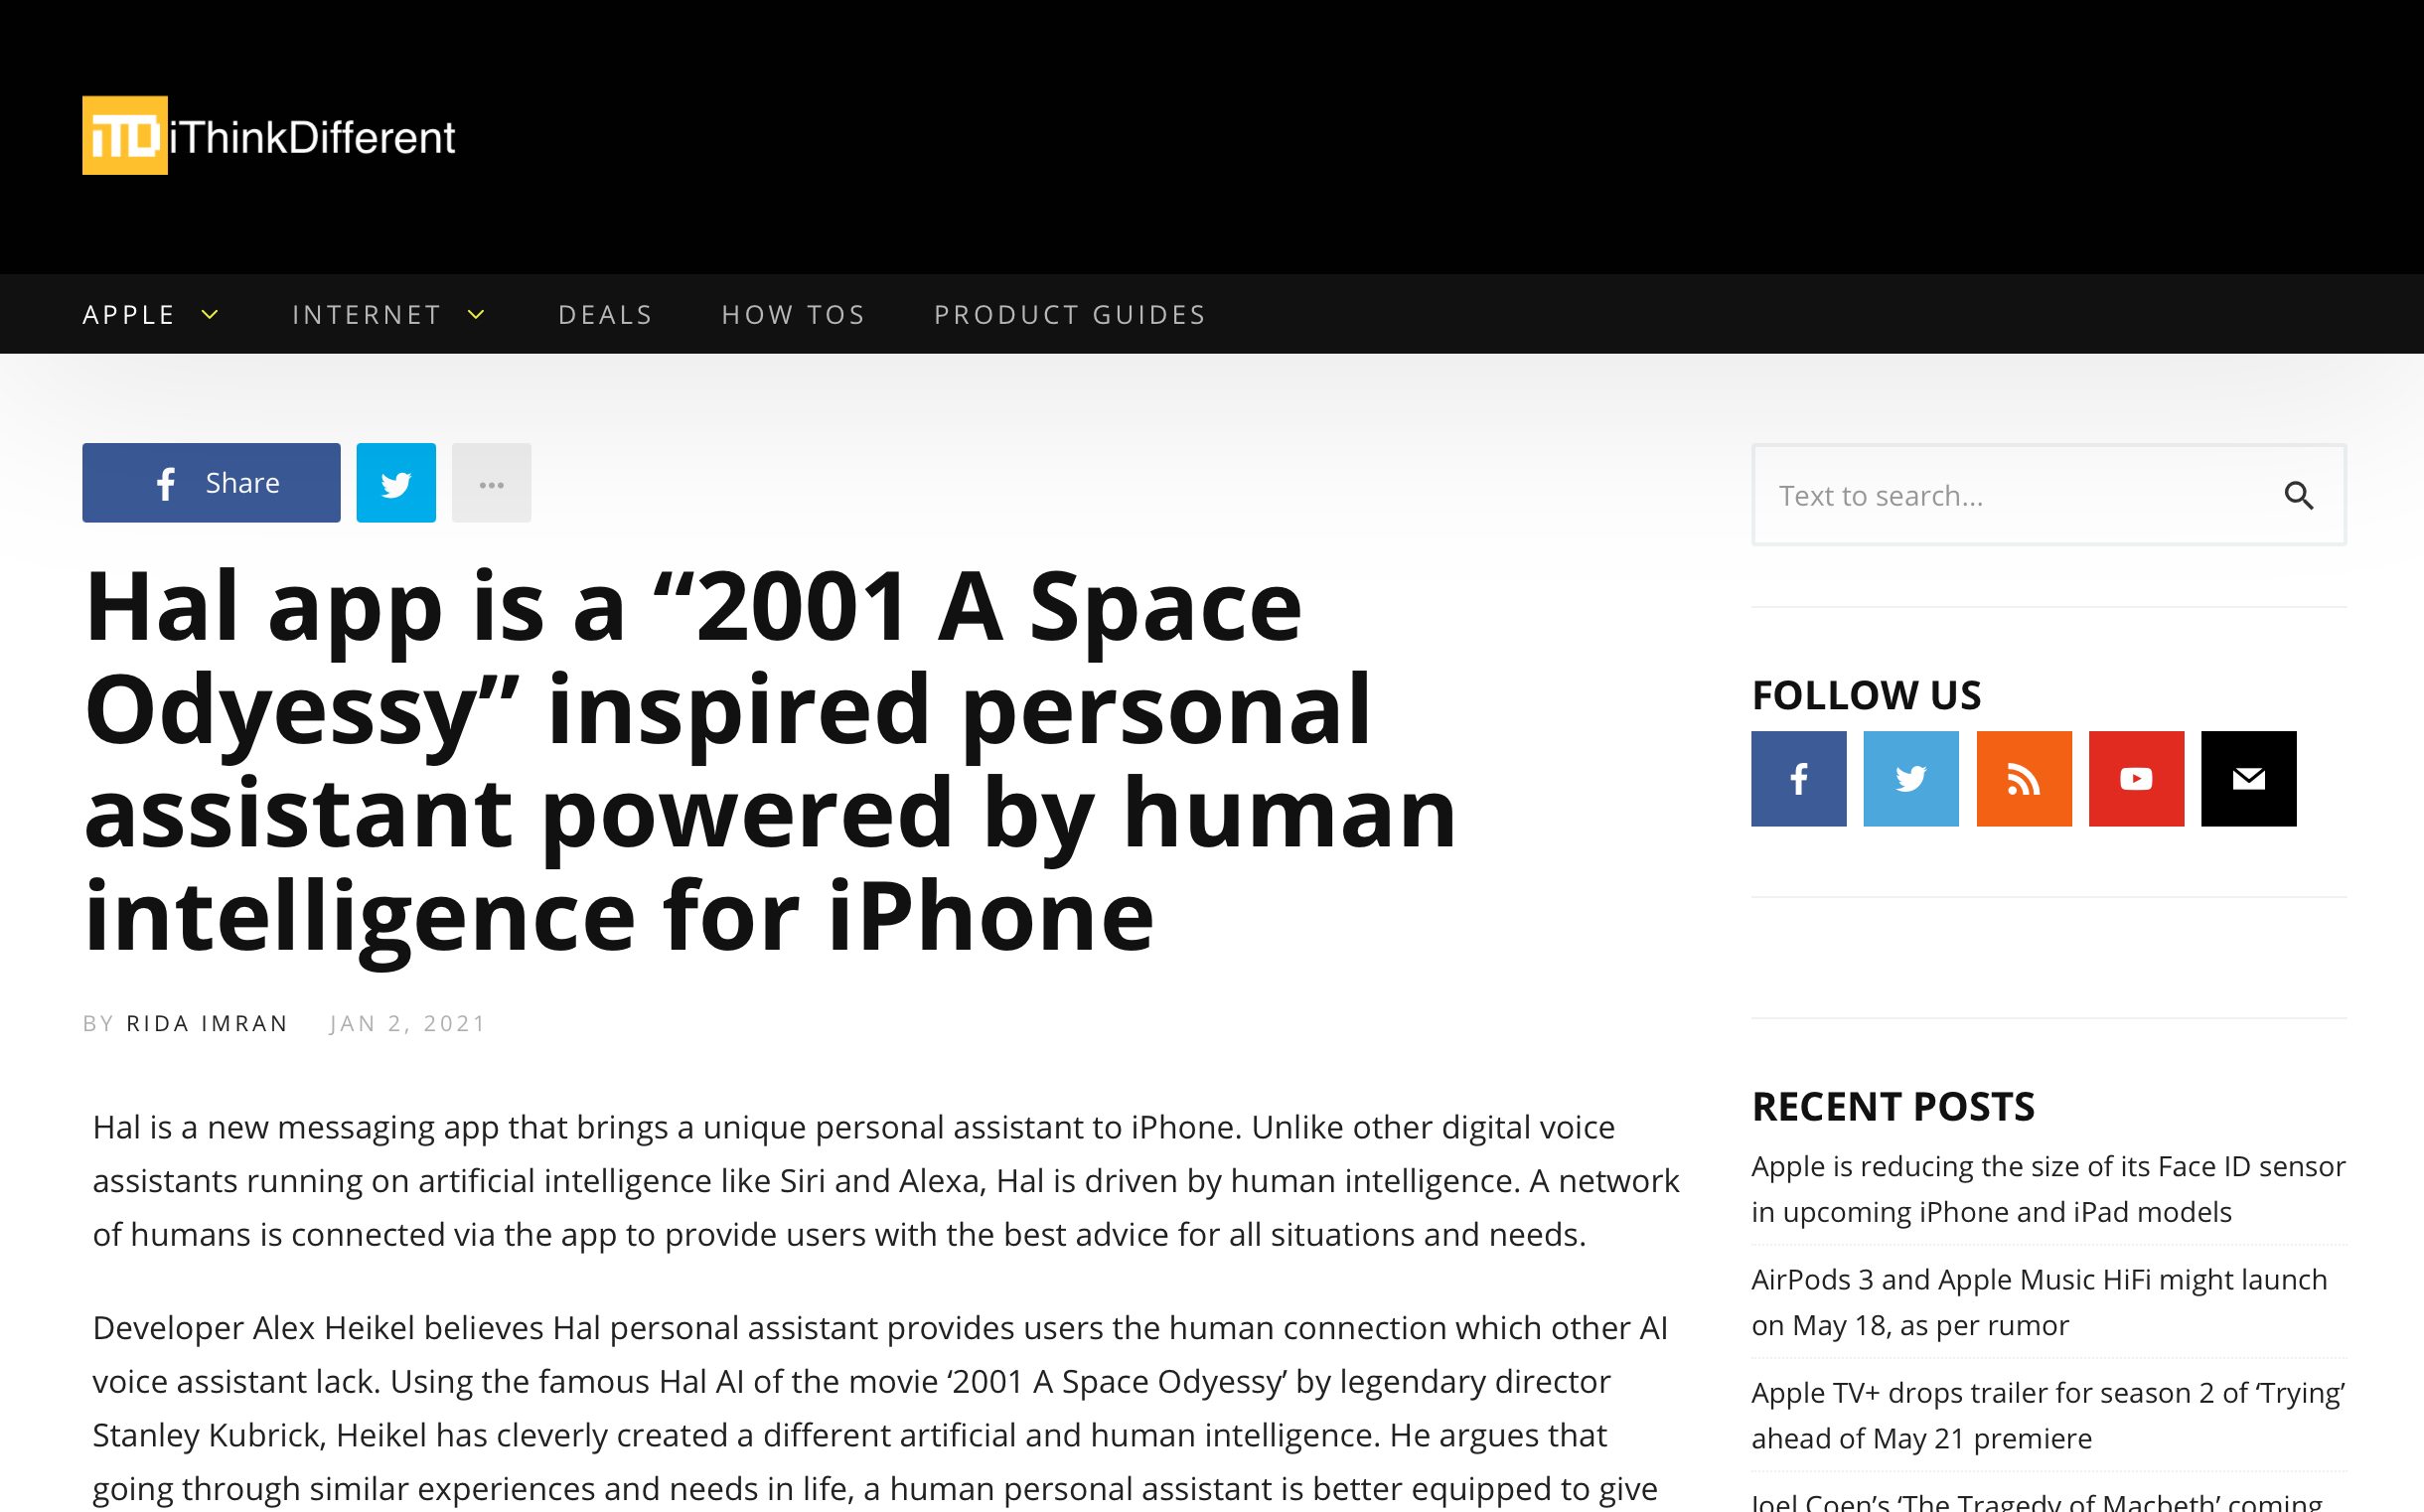 Hal app is a “2001 A Space Odyessy” inspired personal assistant powered by human intelligence for iPhone